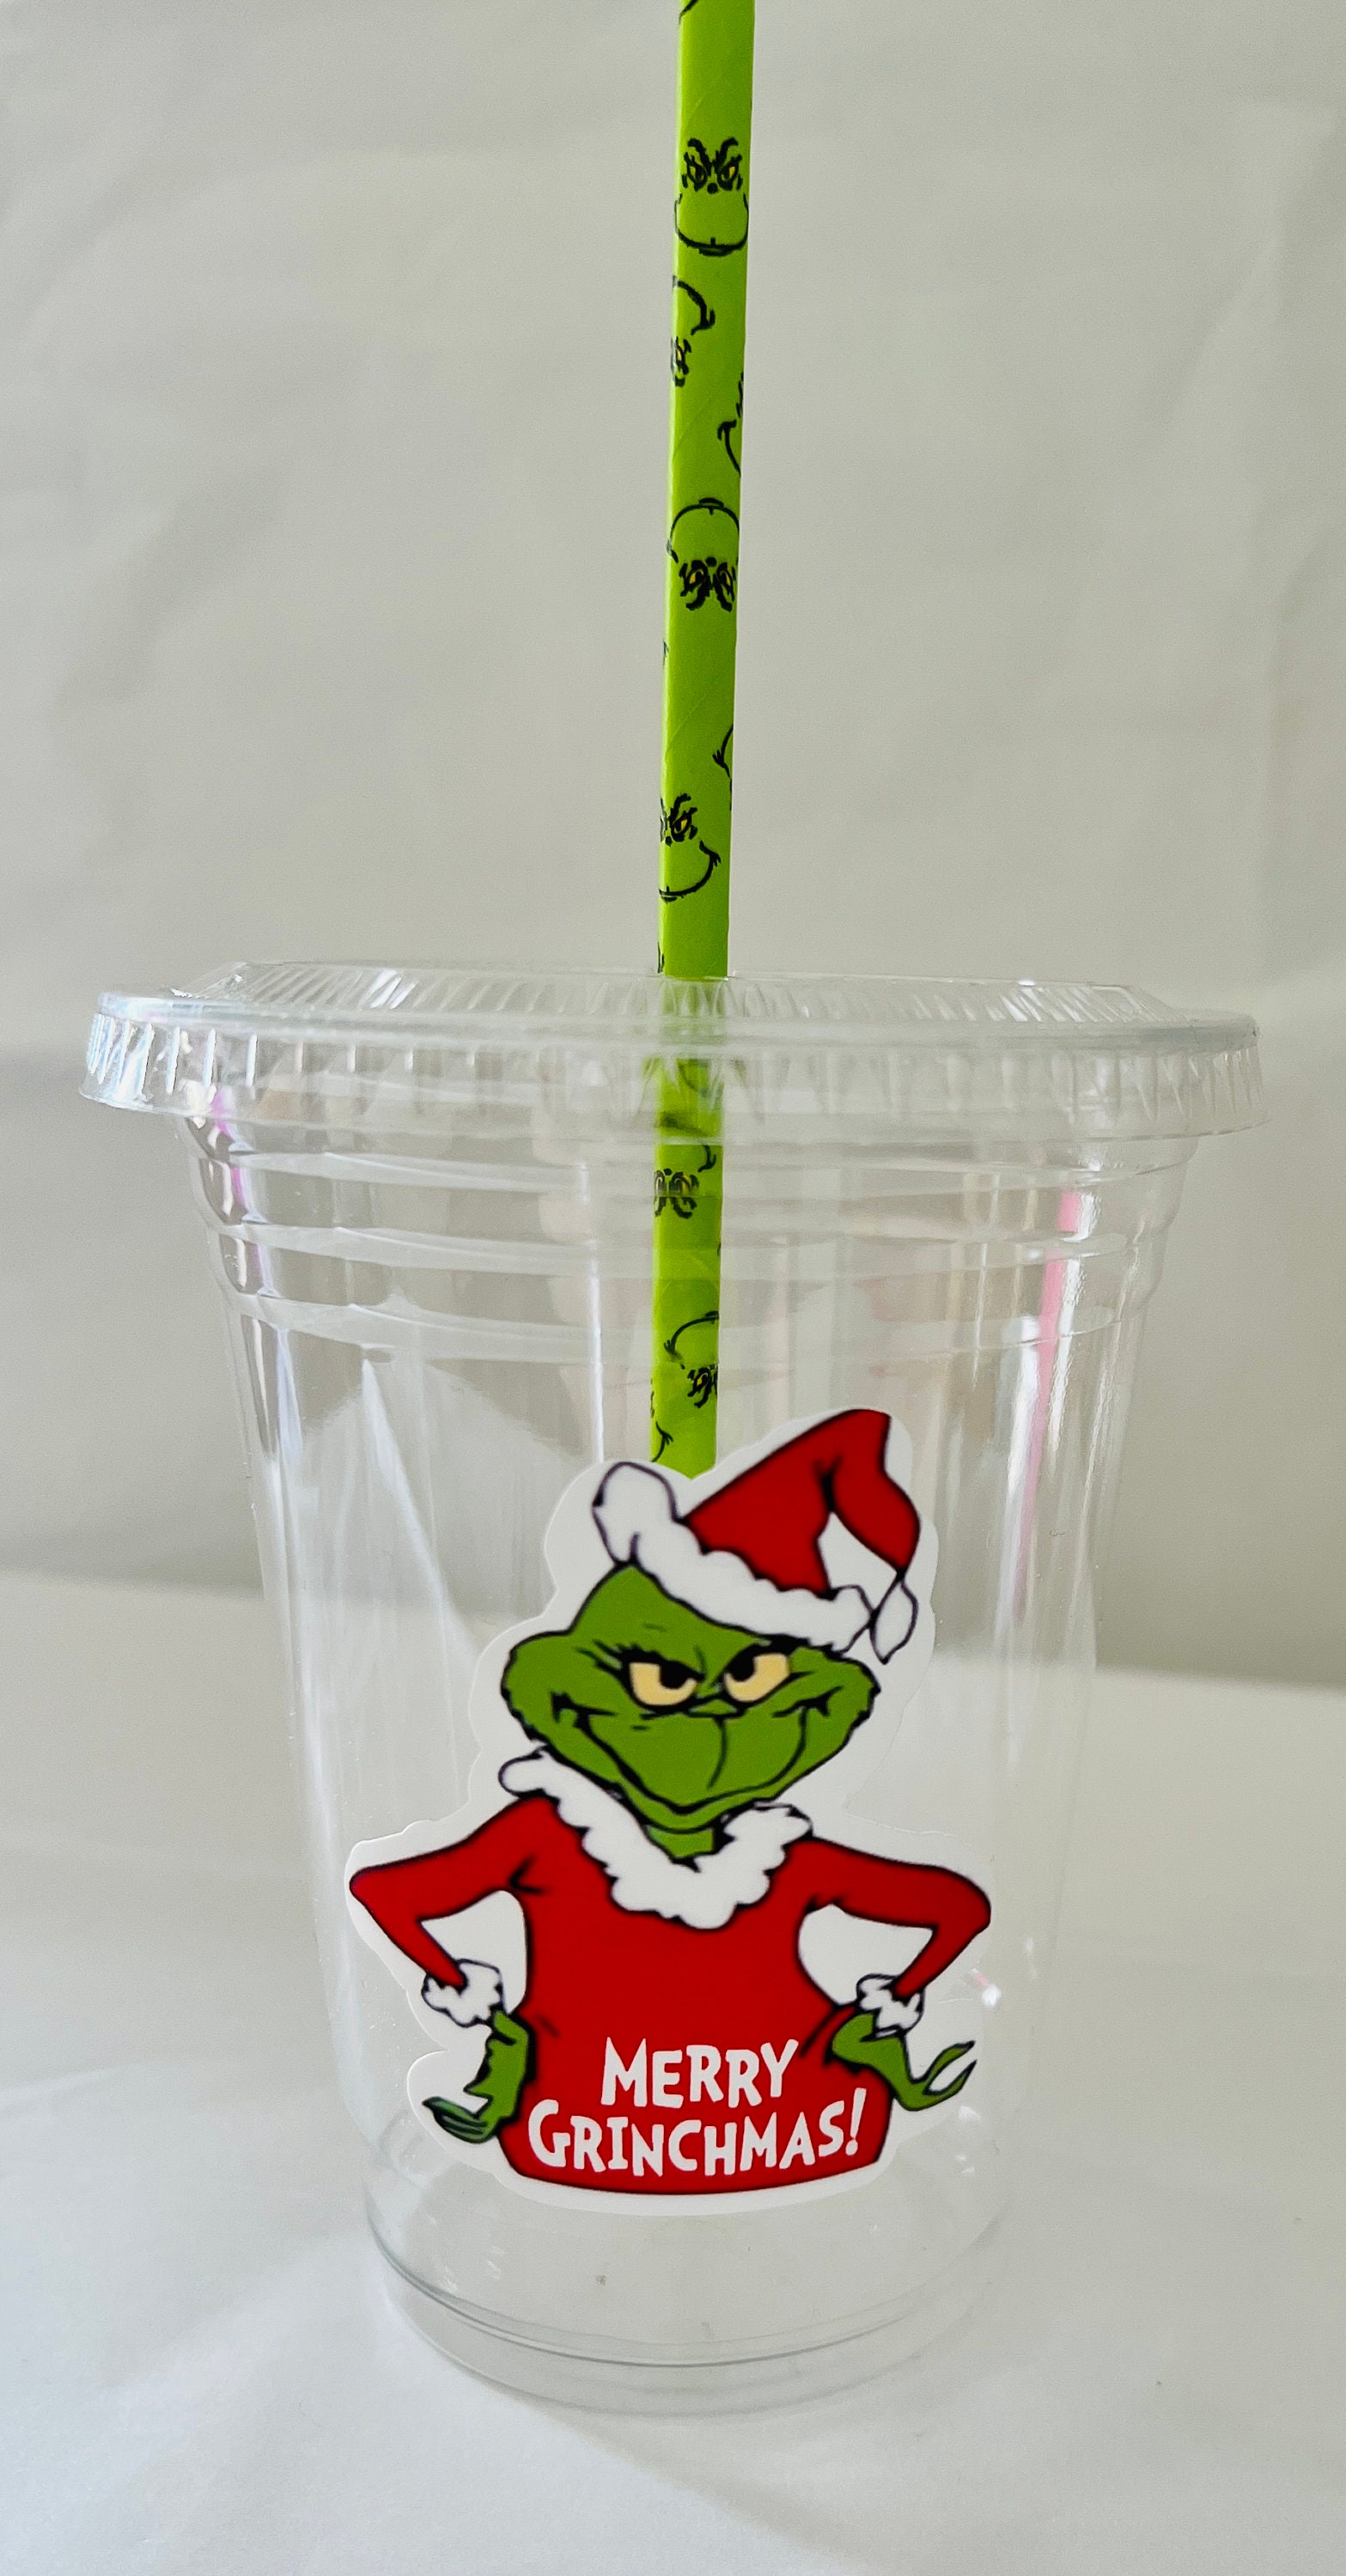 The Grinch Wearing Santa Hat Popcorn Maker Pops Kernels With Hot Air Not  Oil NEW